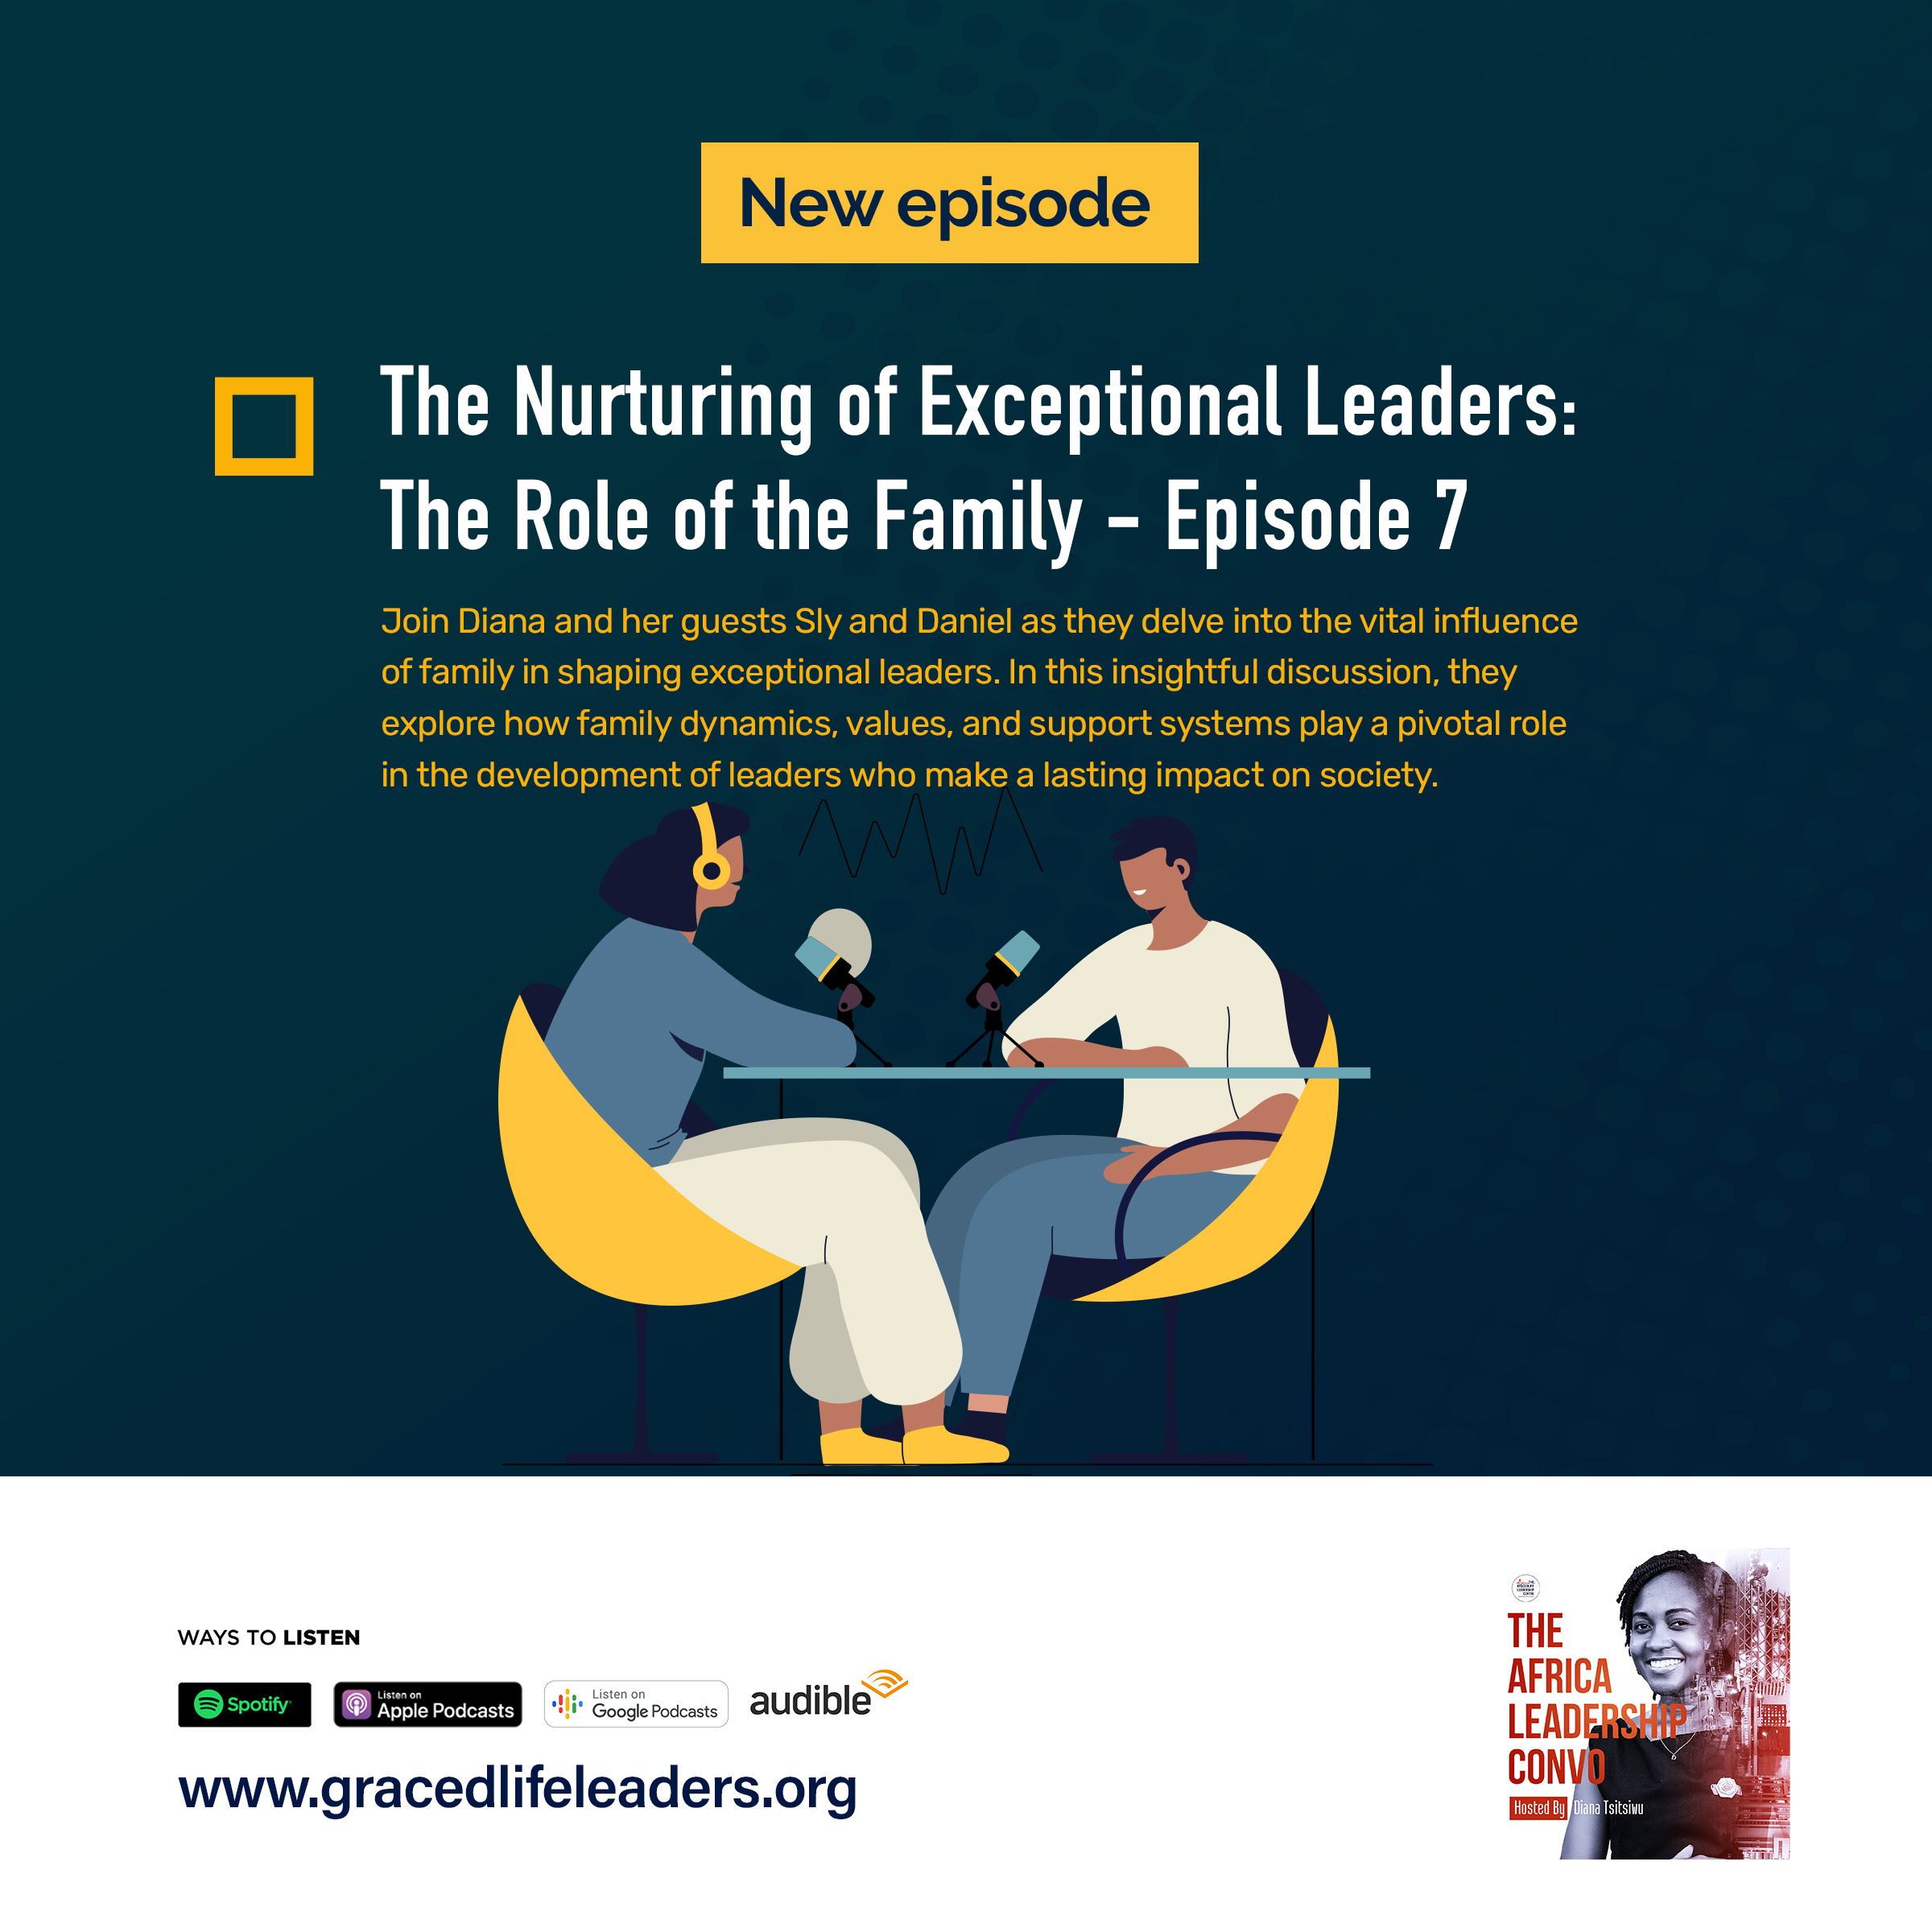 The Nurturing of Exceptional Leaders: The Role of the Family